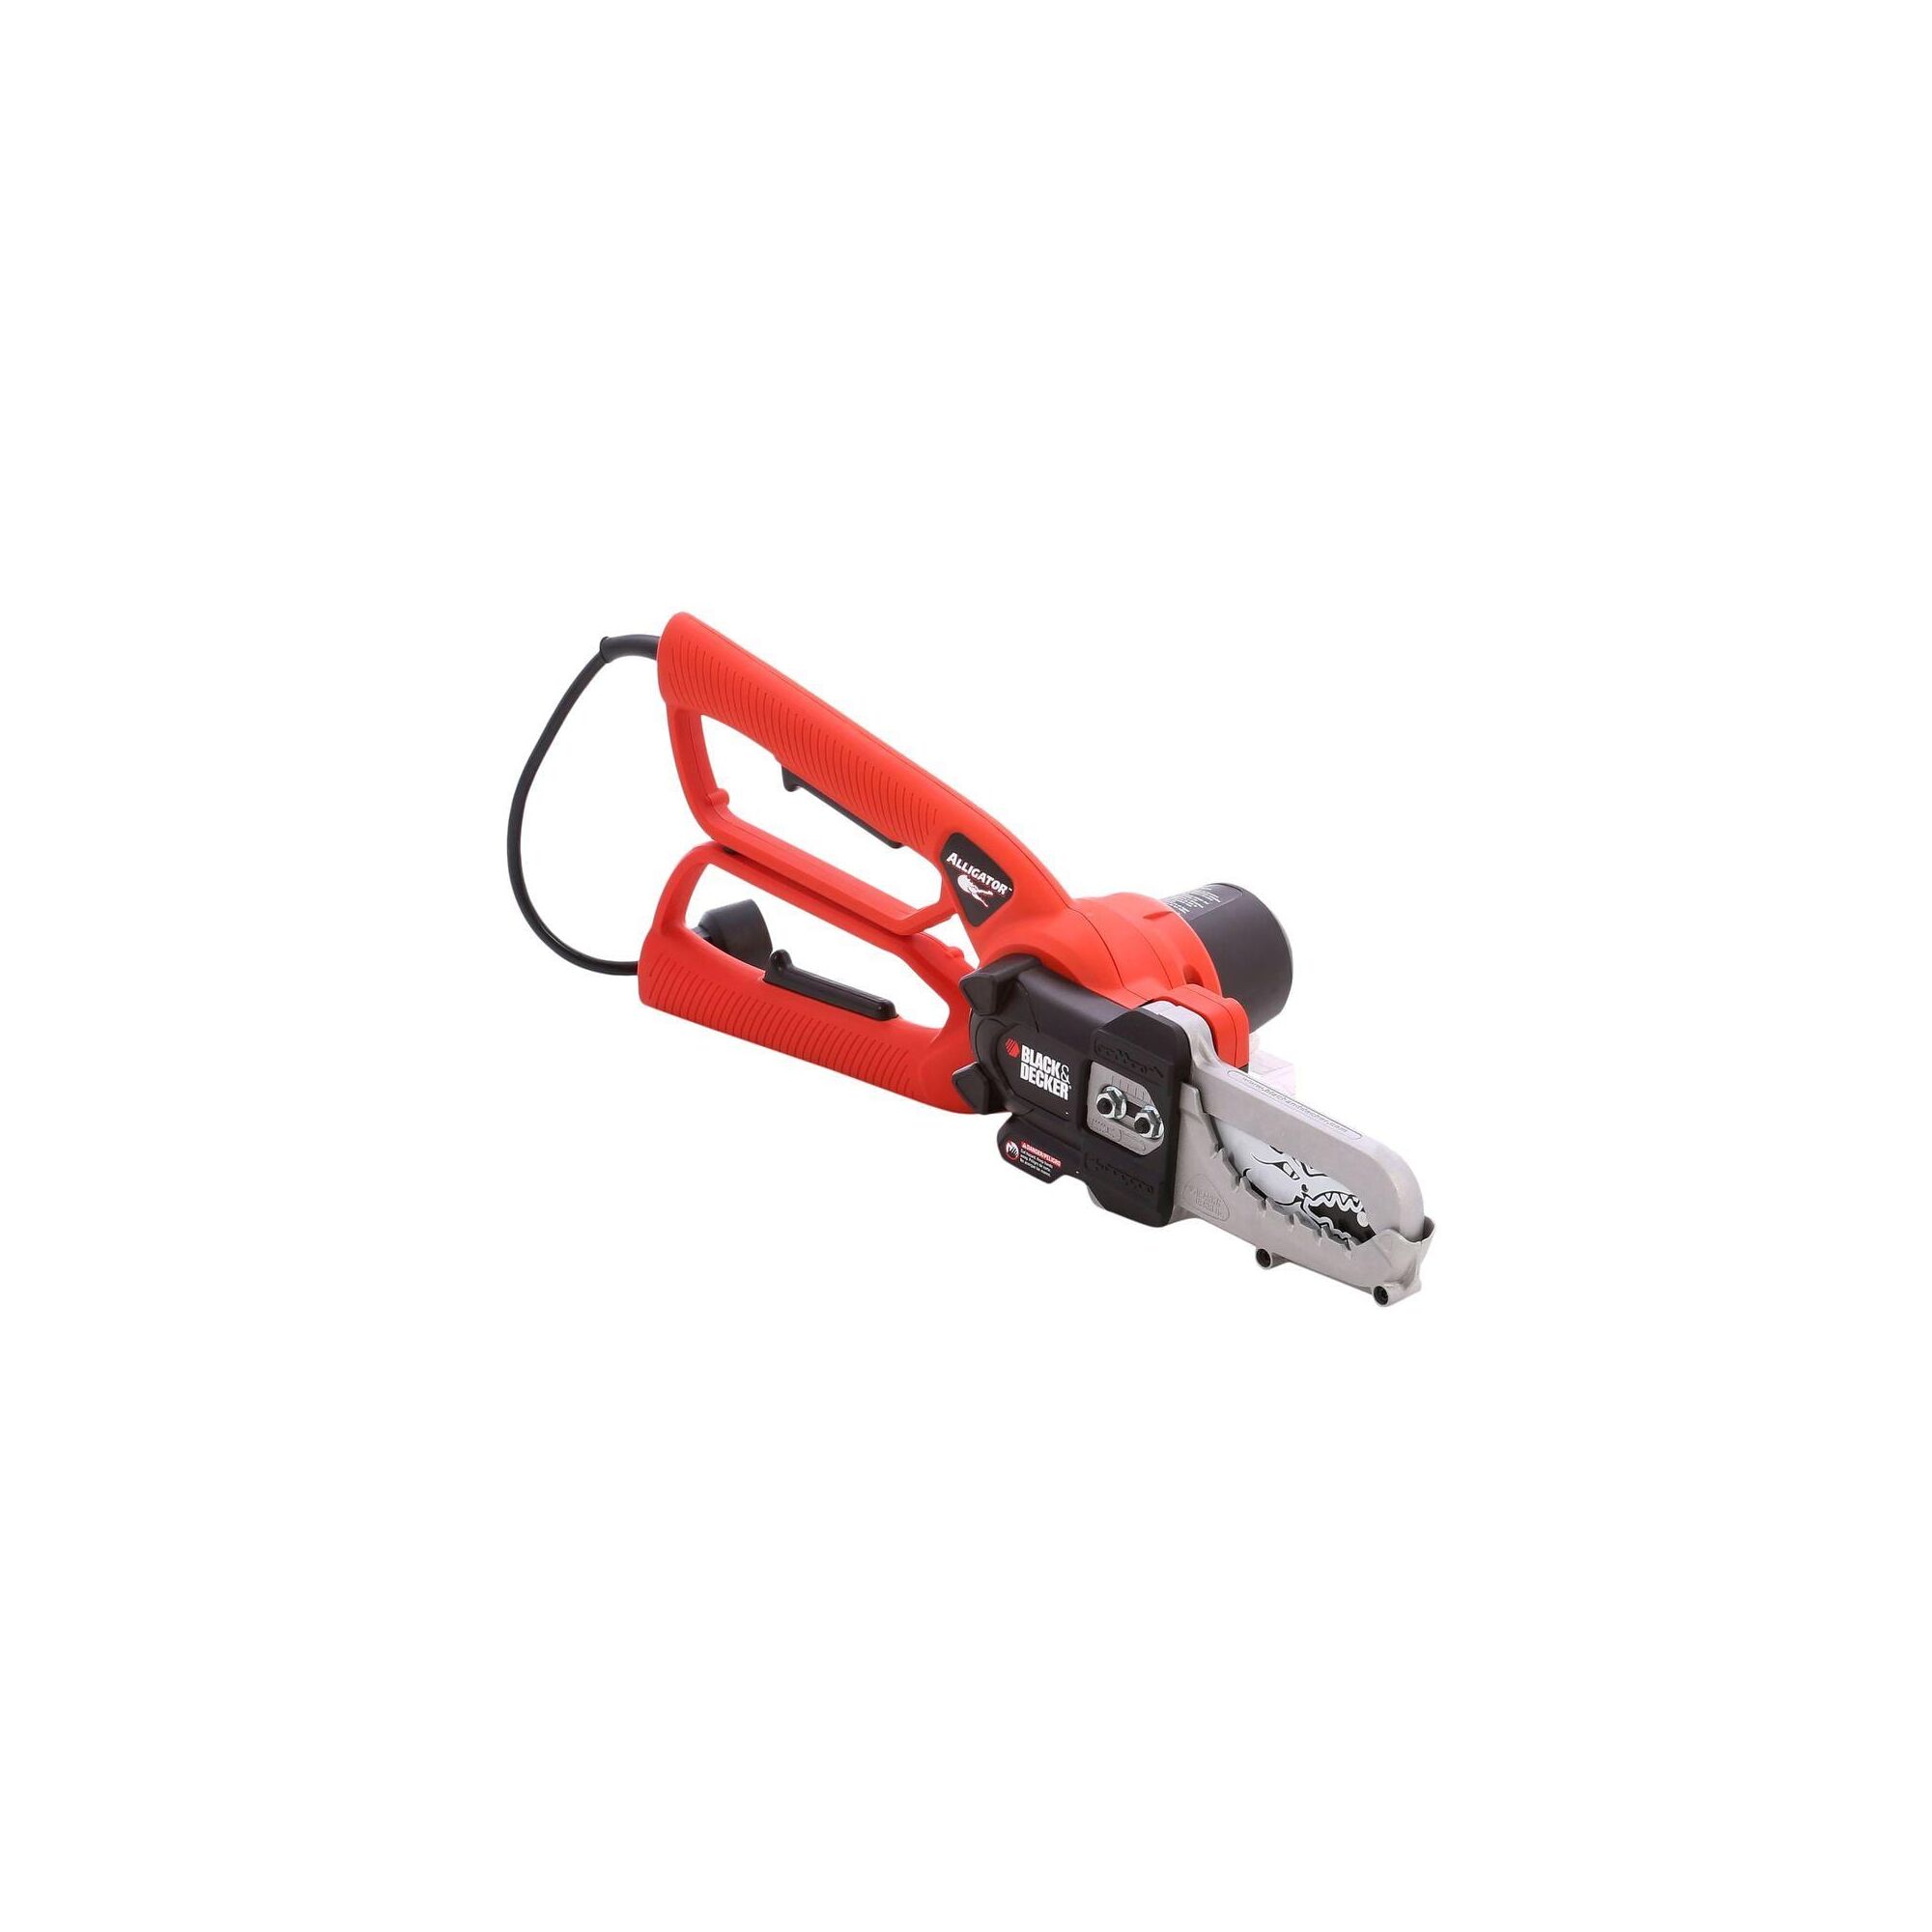 Electric Outdoor Lopper on white background.